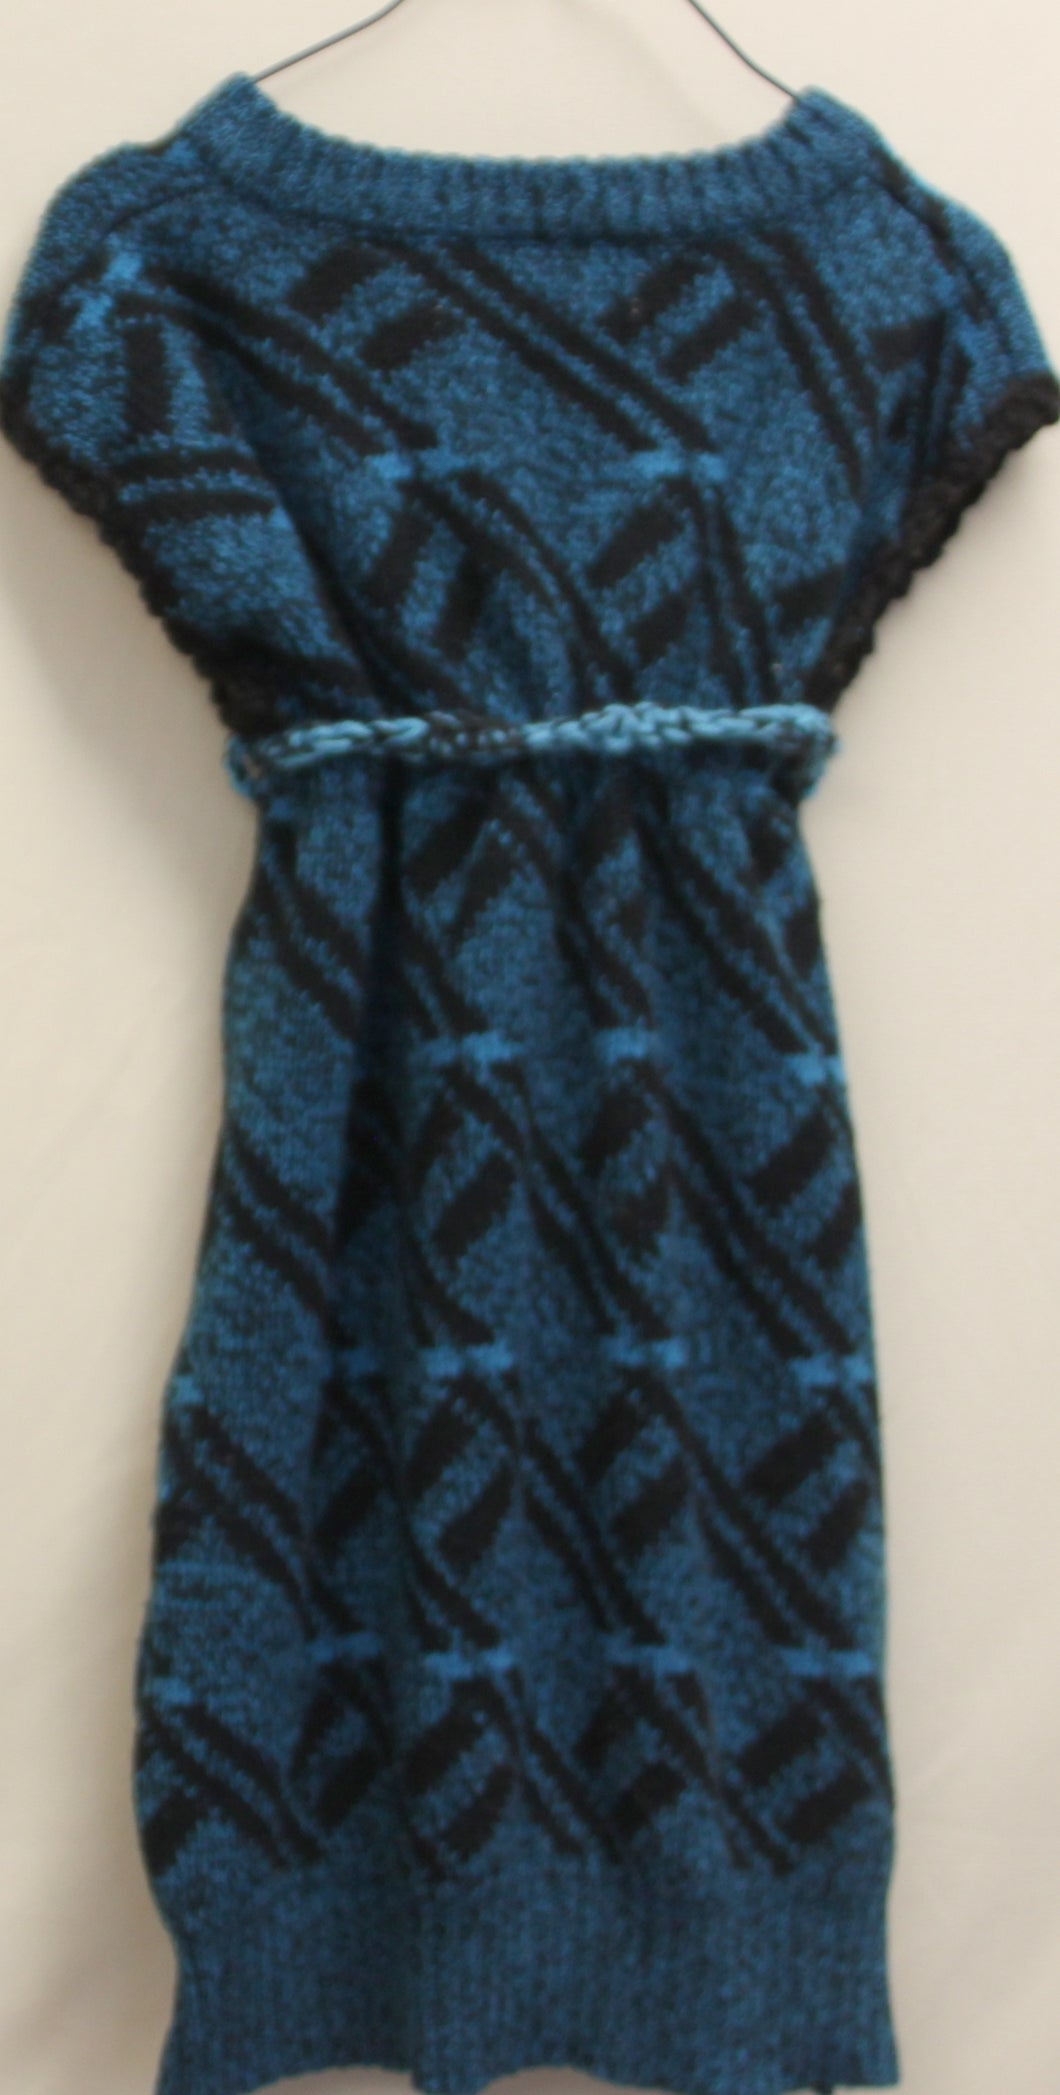 Hand Knit Girls Jumper Dress Blue and Black Pattern - nw-camo